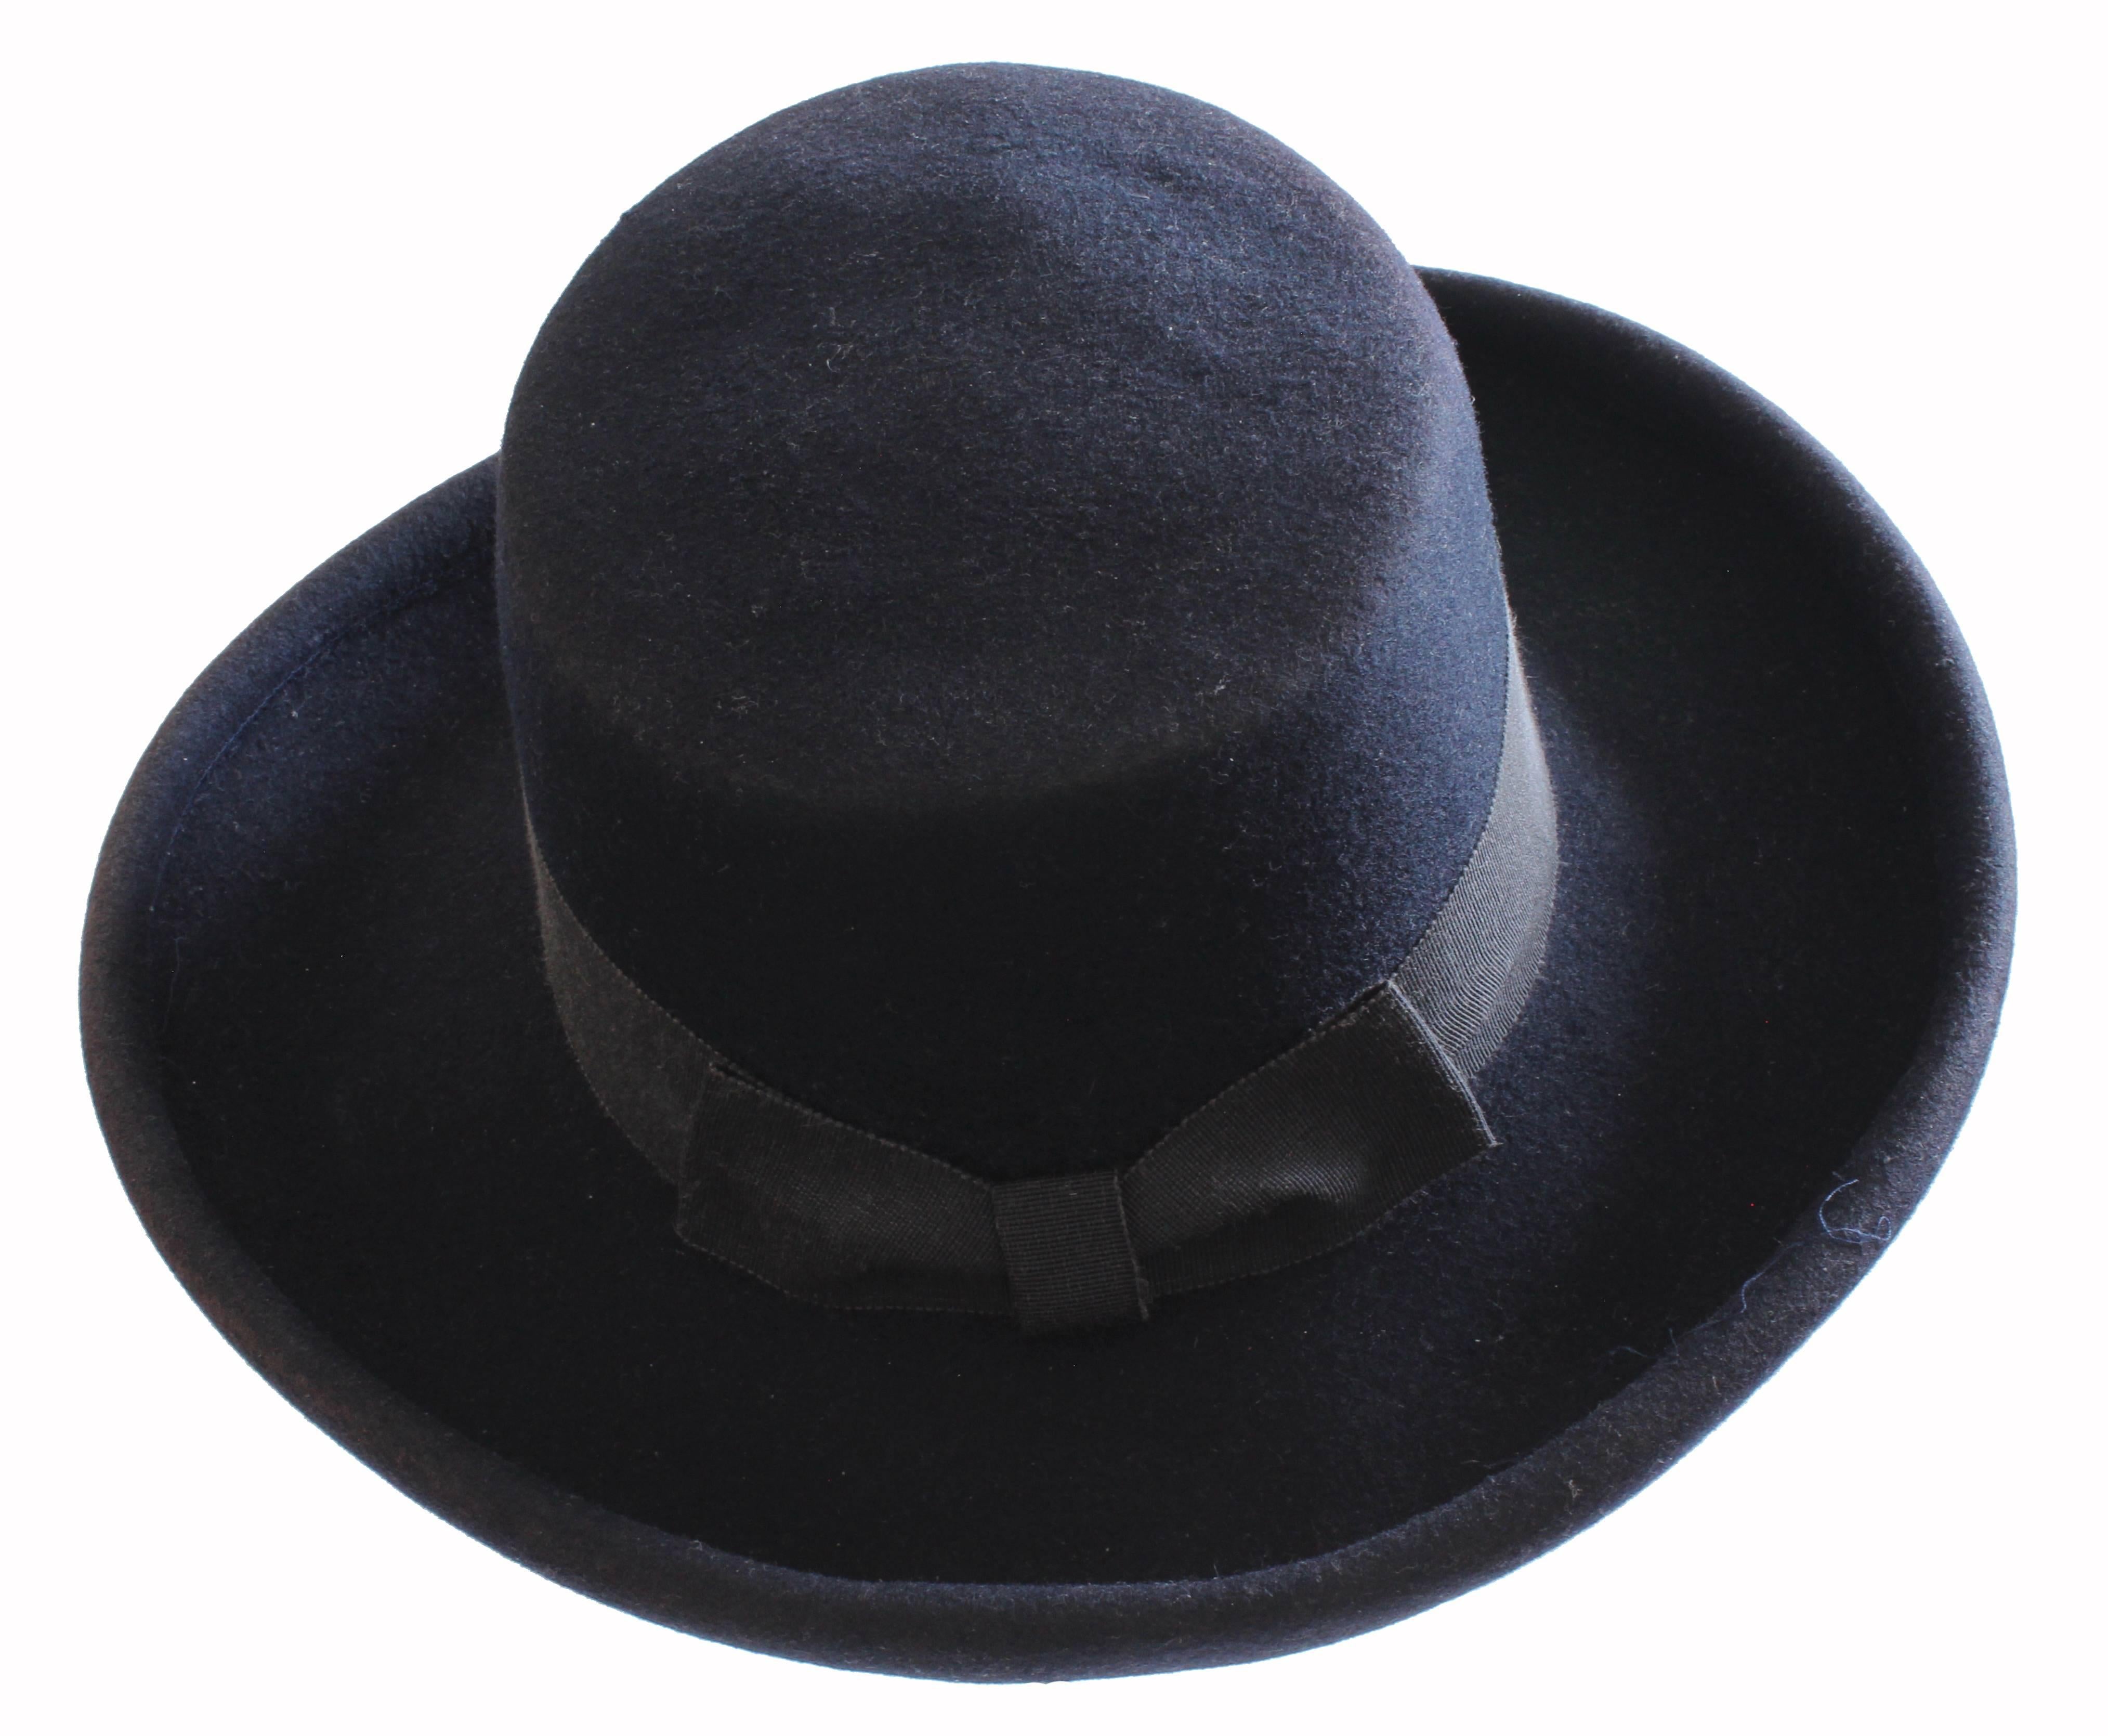 This wide brim hat was made by Tina Too and the Bollman Hat Company, most likely in the 1960s.  Made from navy blue wool Doeskin felt, it features a grosgrain band at the crown.  In good condition given its age, we note slight fading to the edges. 